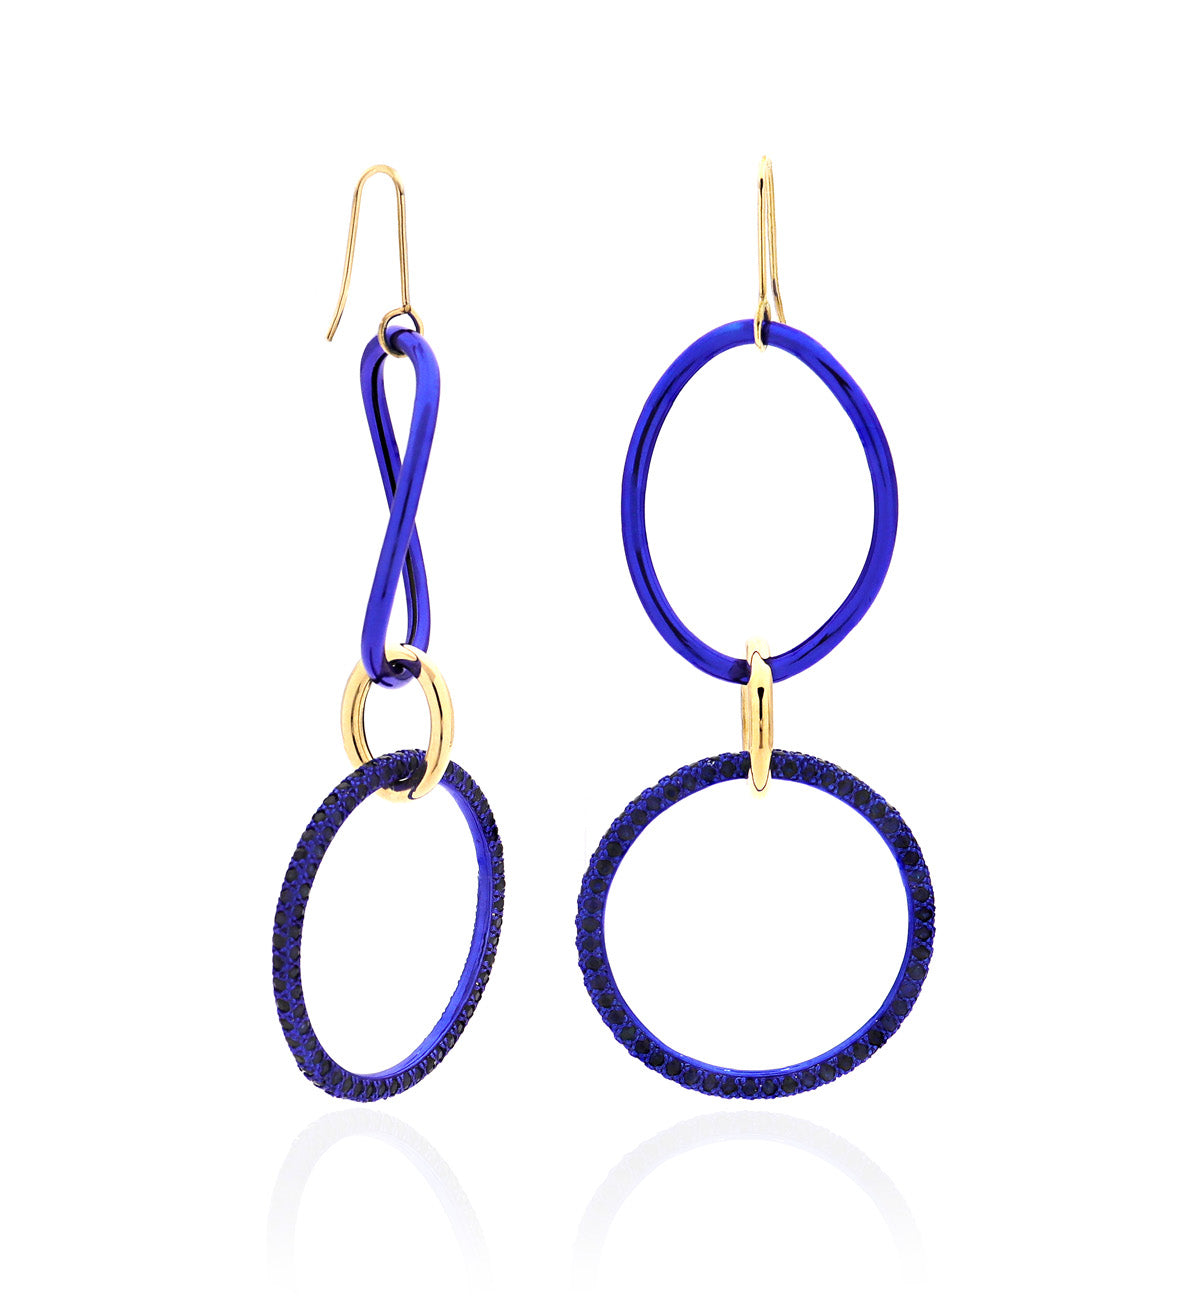 STELLA COLLECTION 18KT GOLD EARRINGS - BLUE SAPPHIRES - LARGE LINK